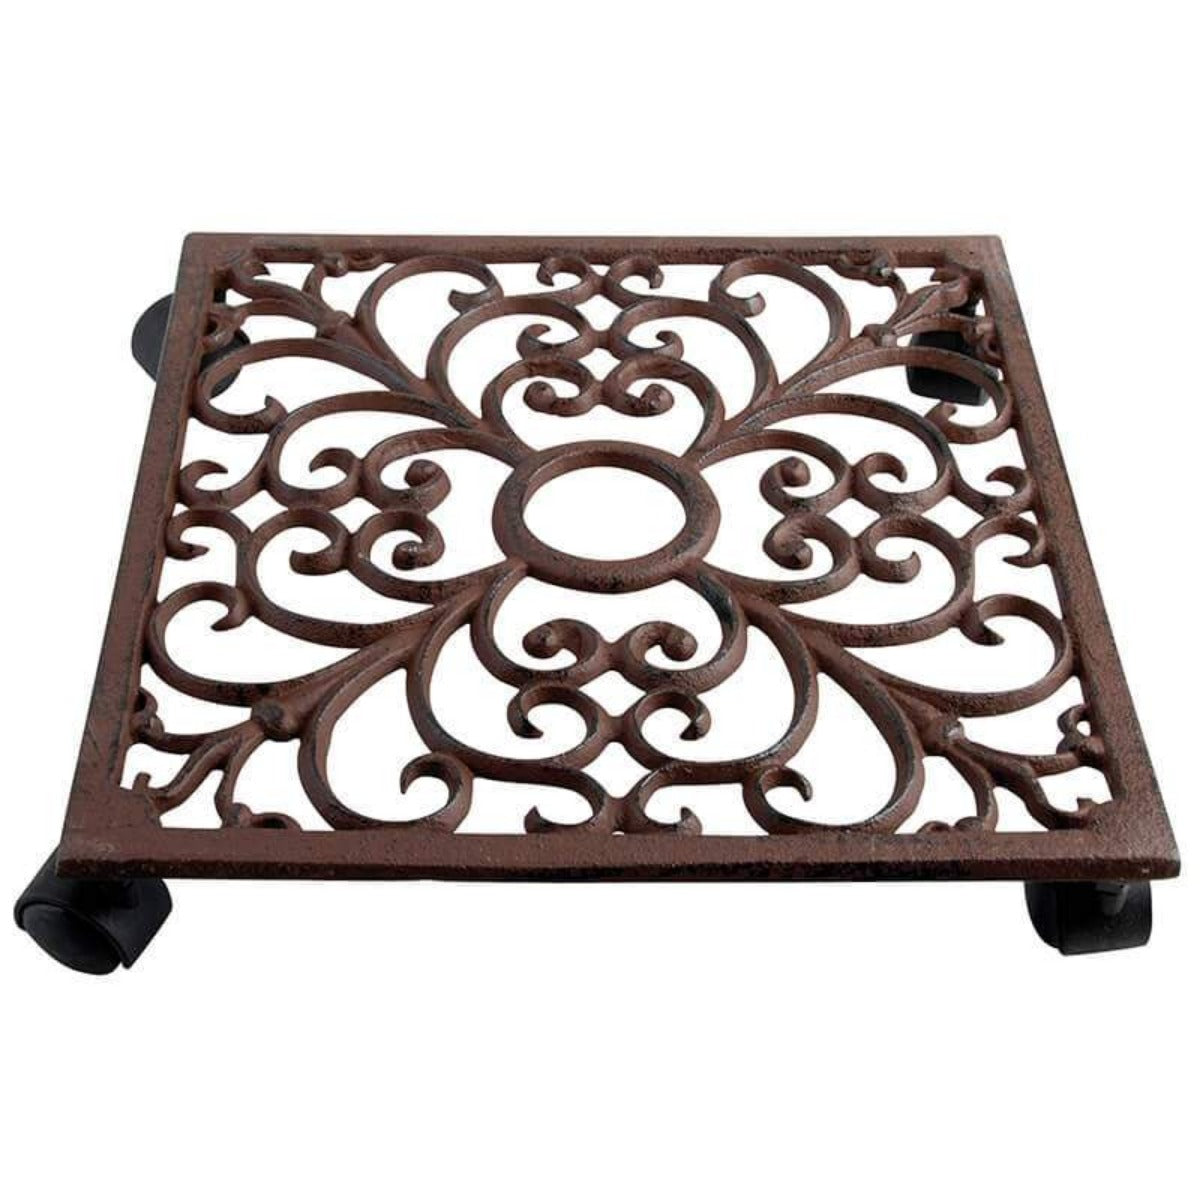 Wrought Iron Plant Trolley - Square-Iron Accents